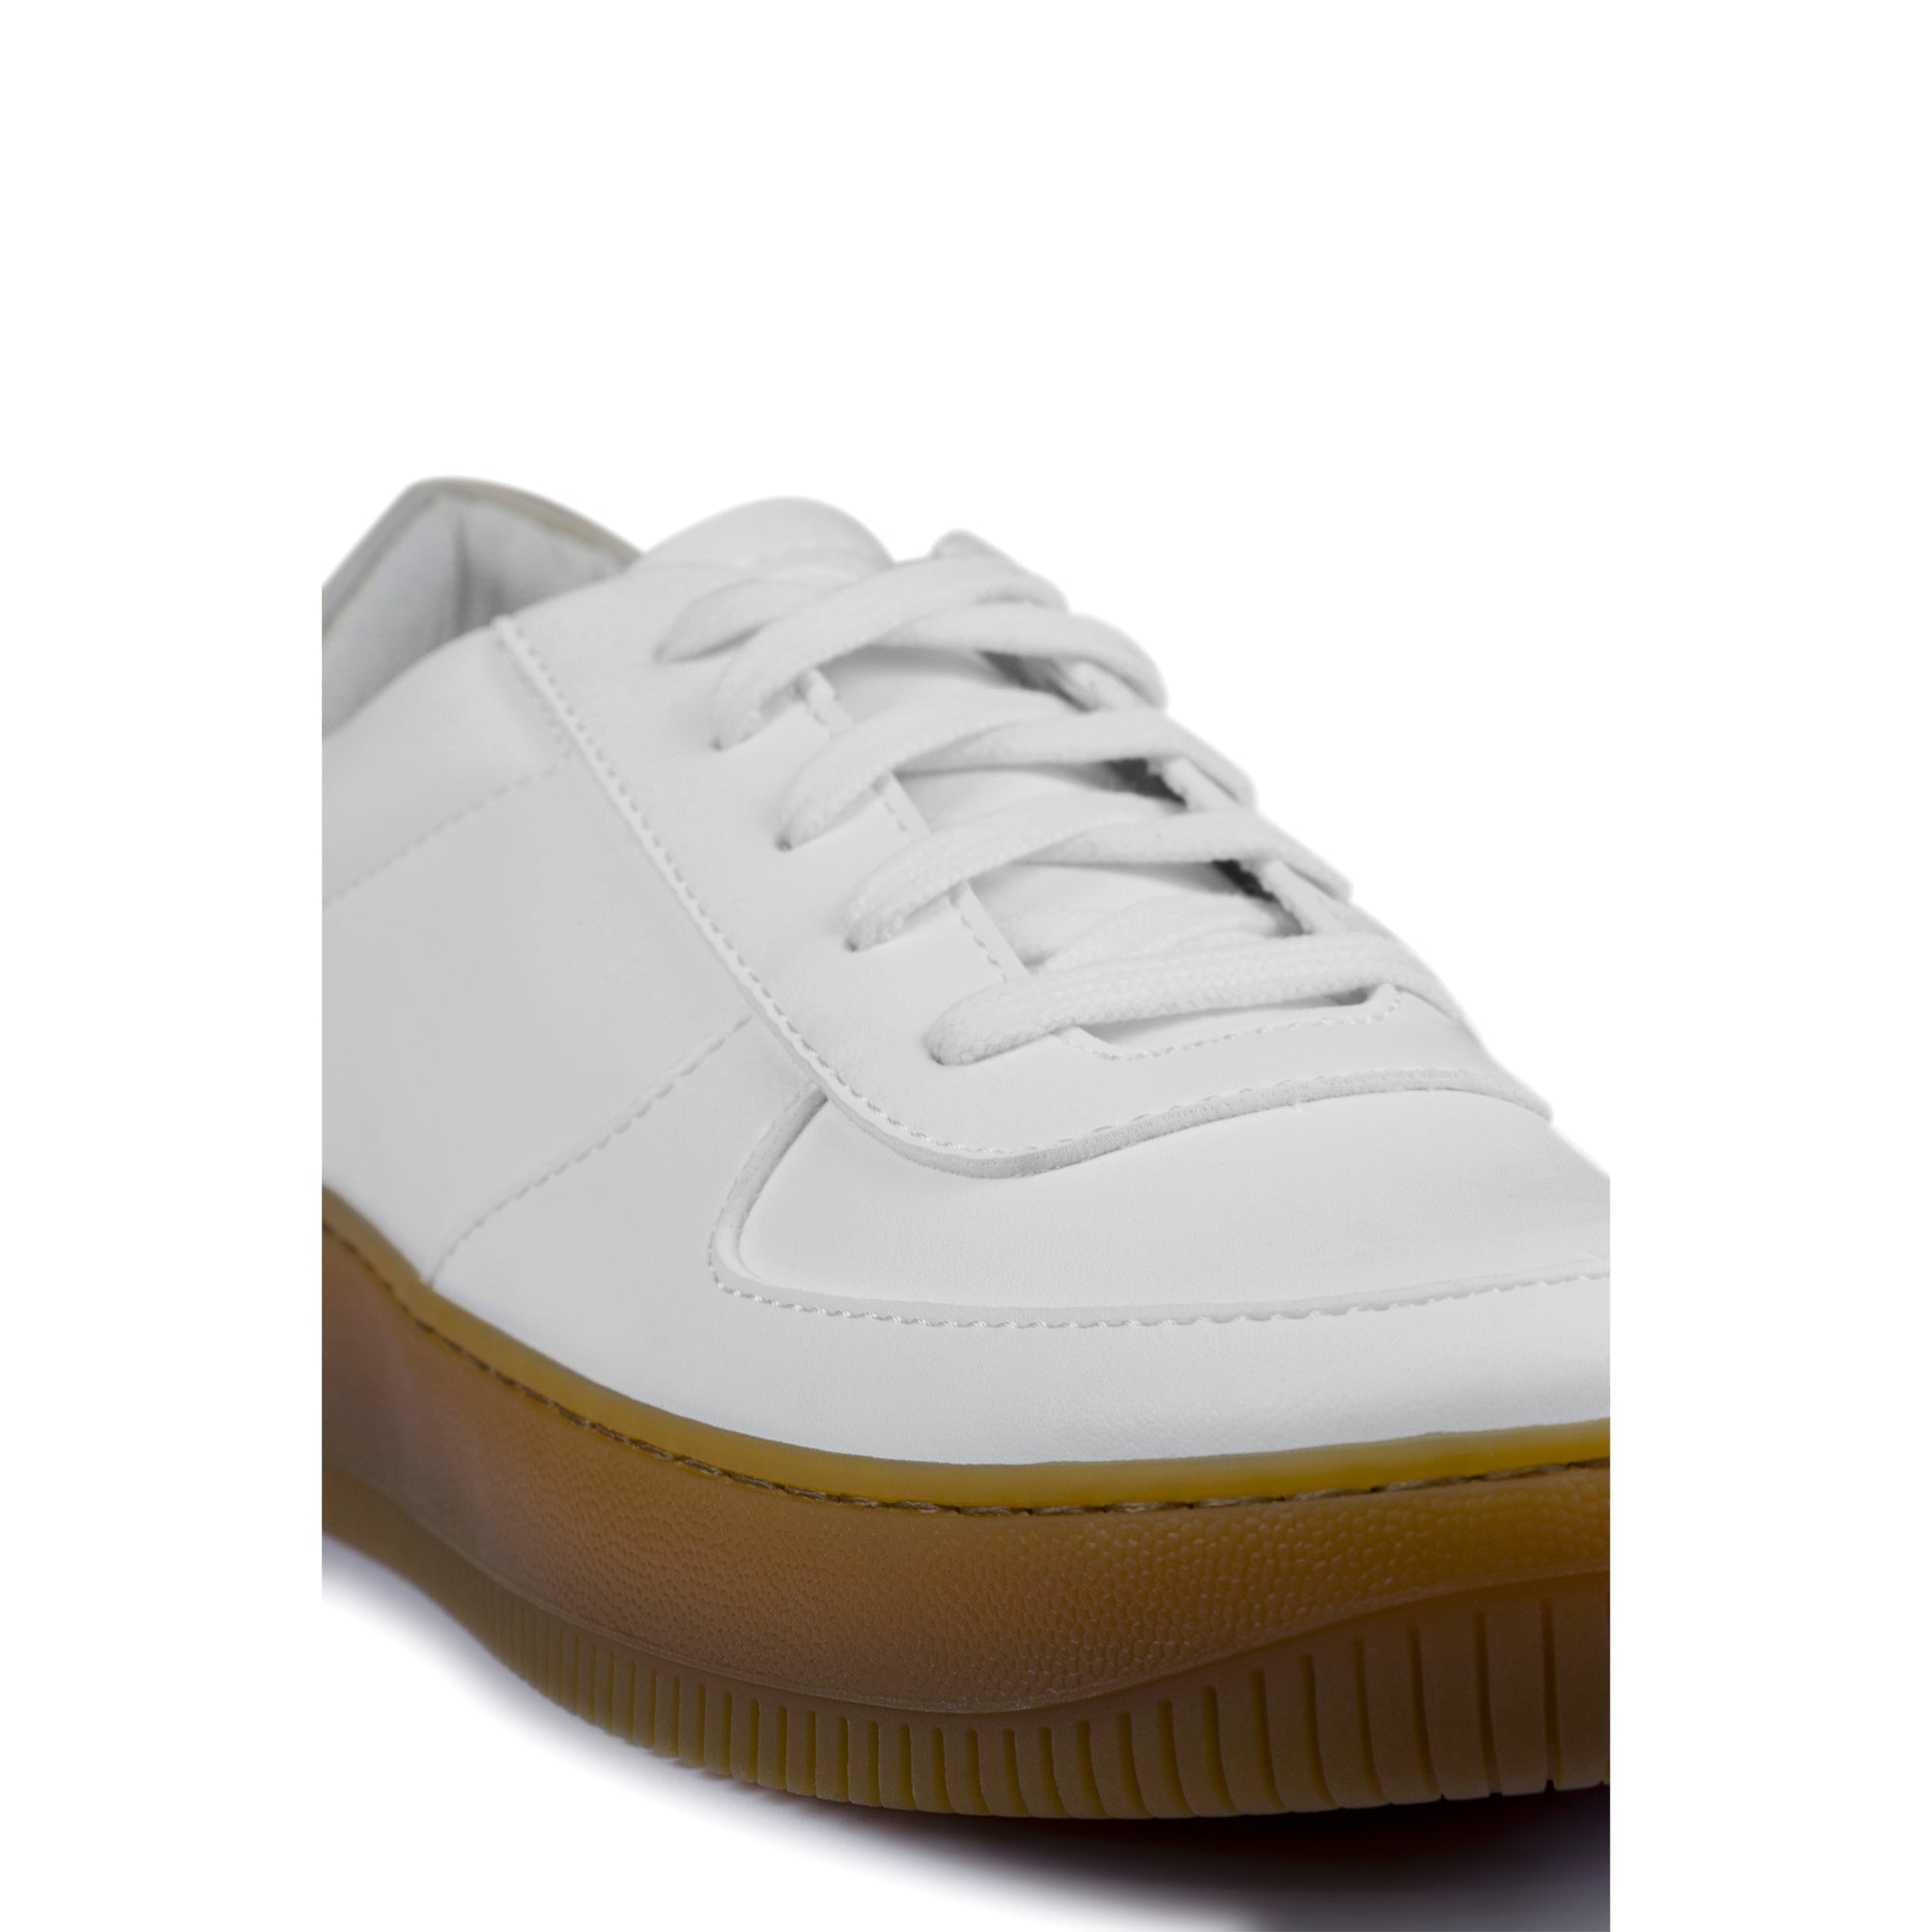 Clement Vegan Leather White/Taupe/Gum